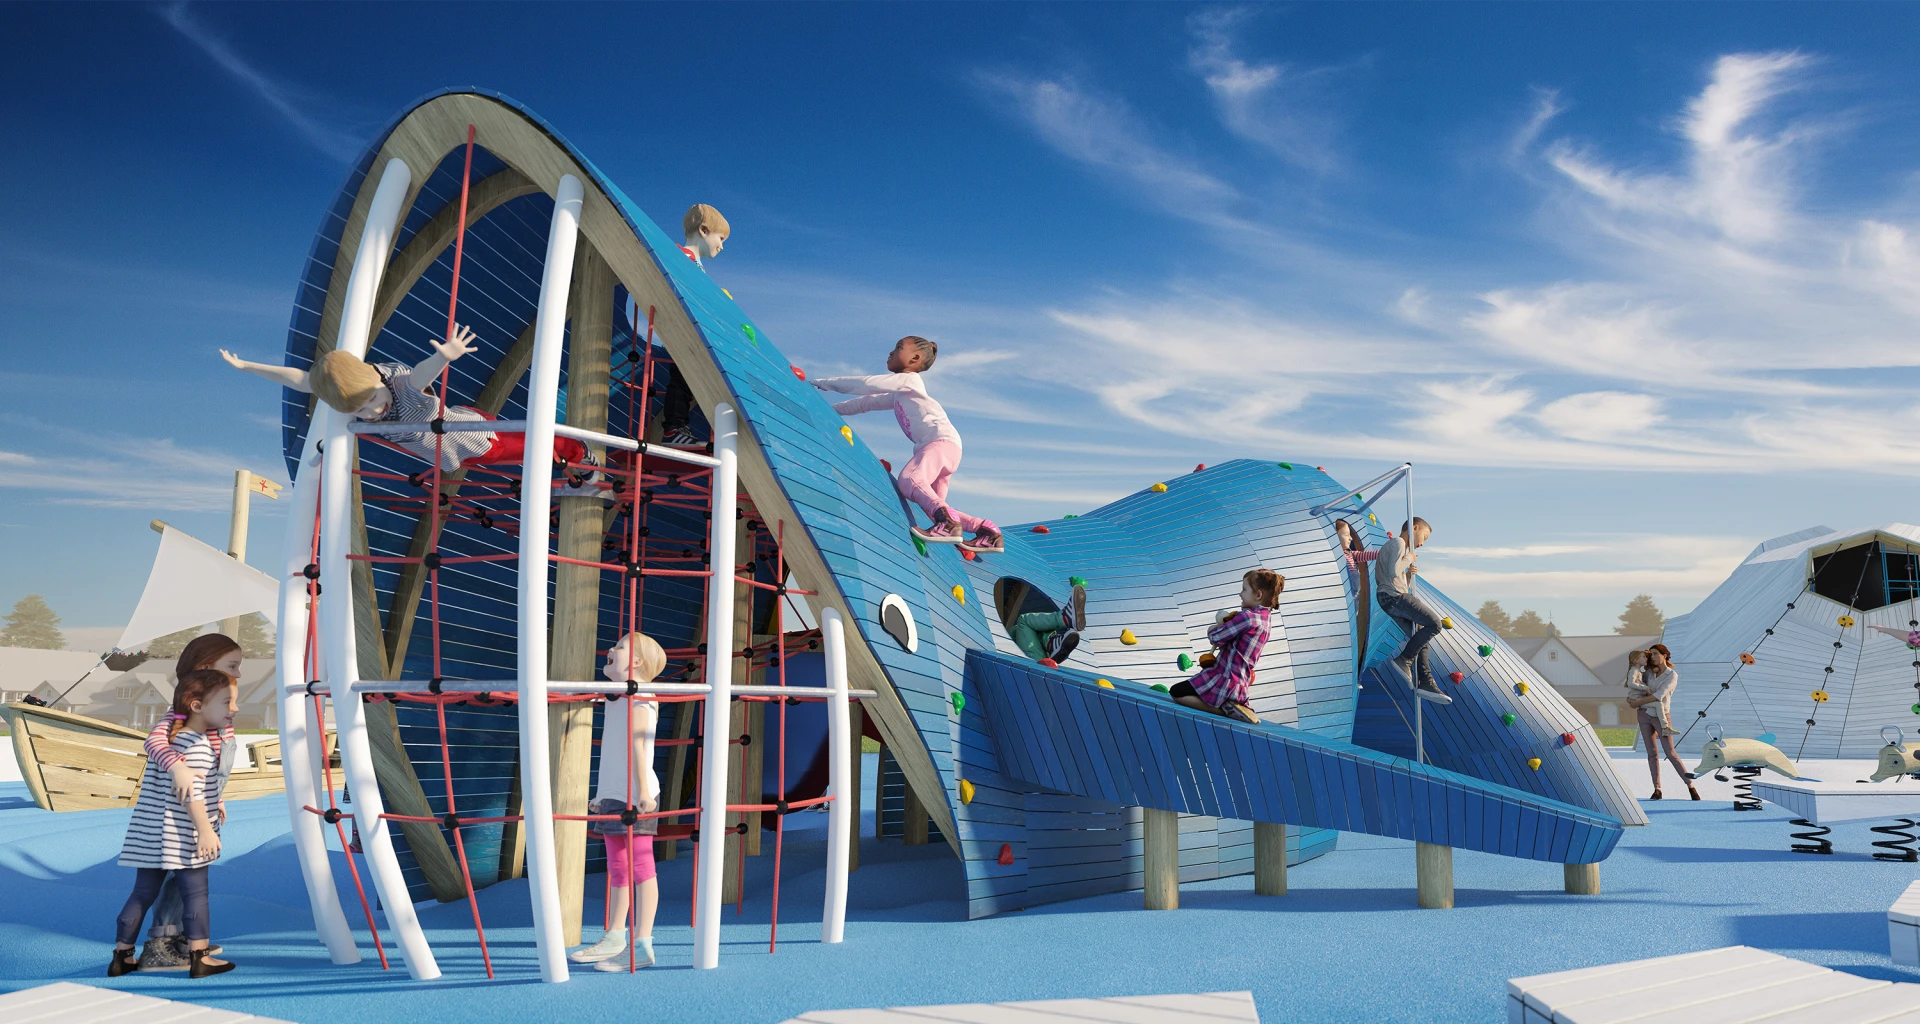 Design rendering of a whale play structure